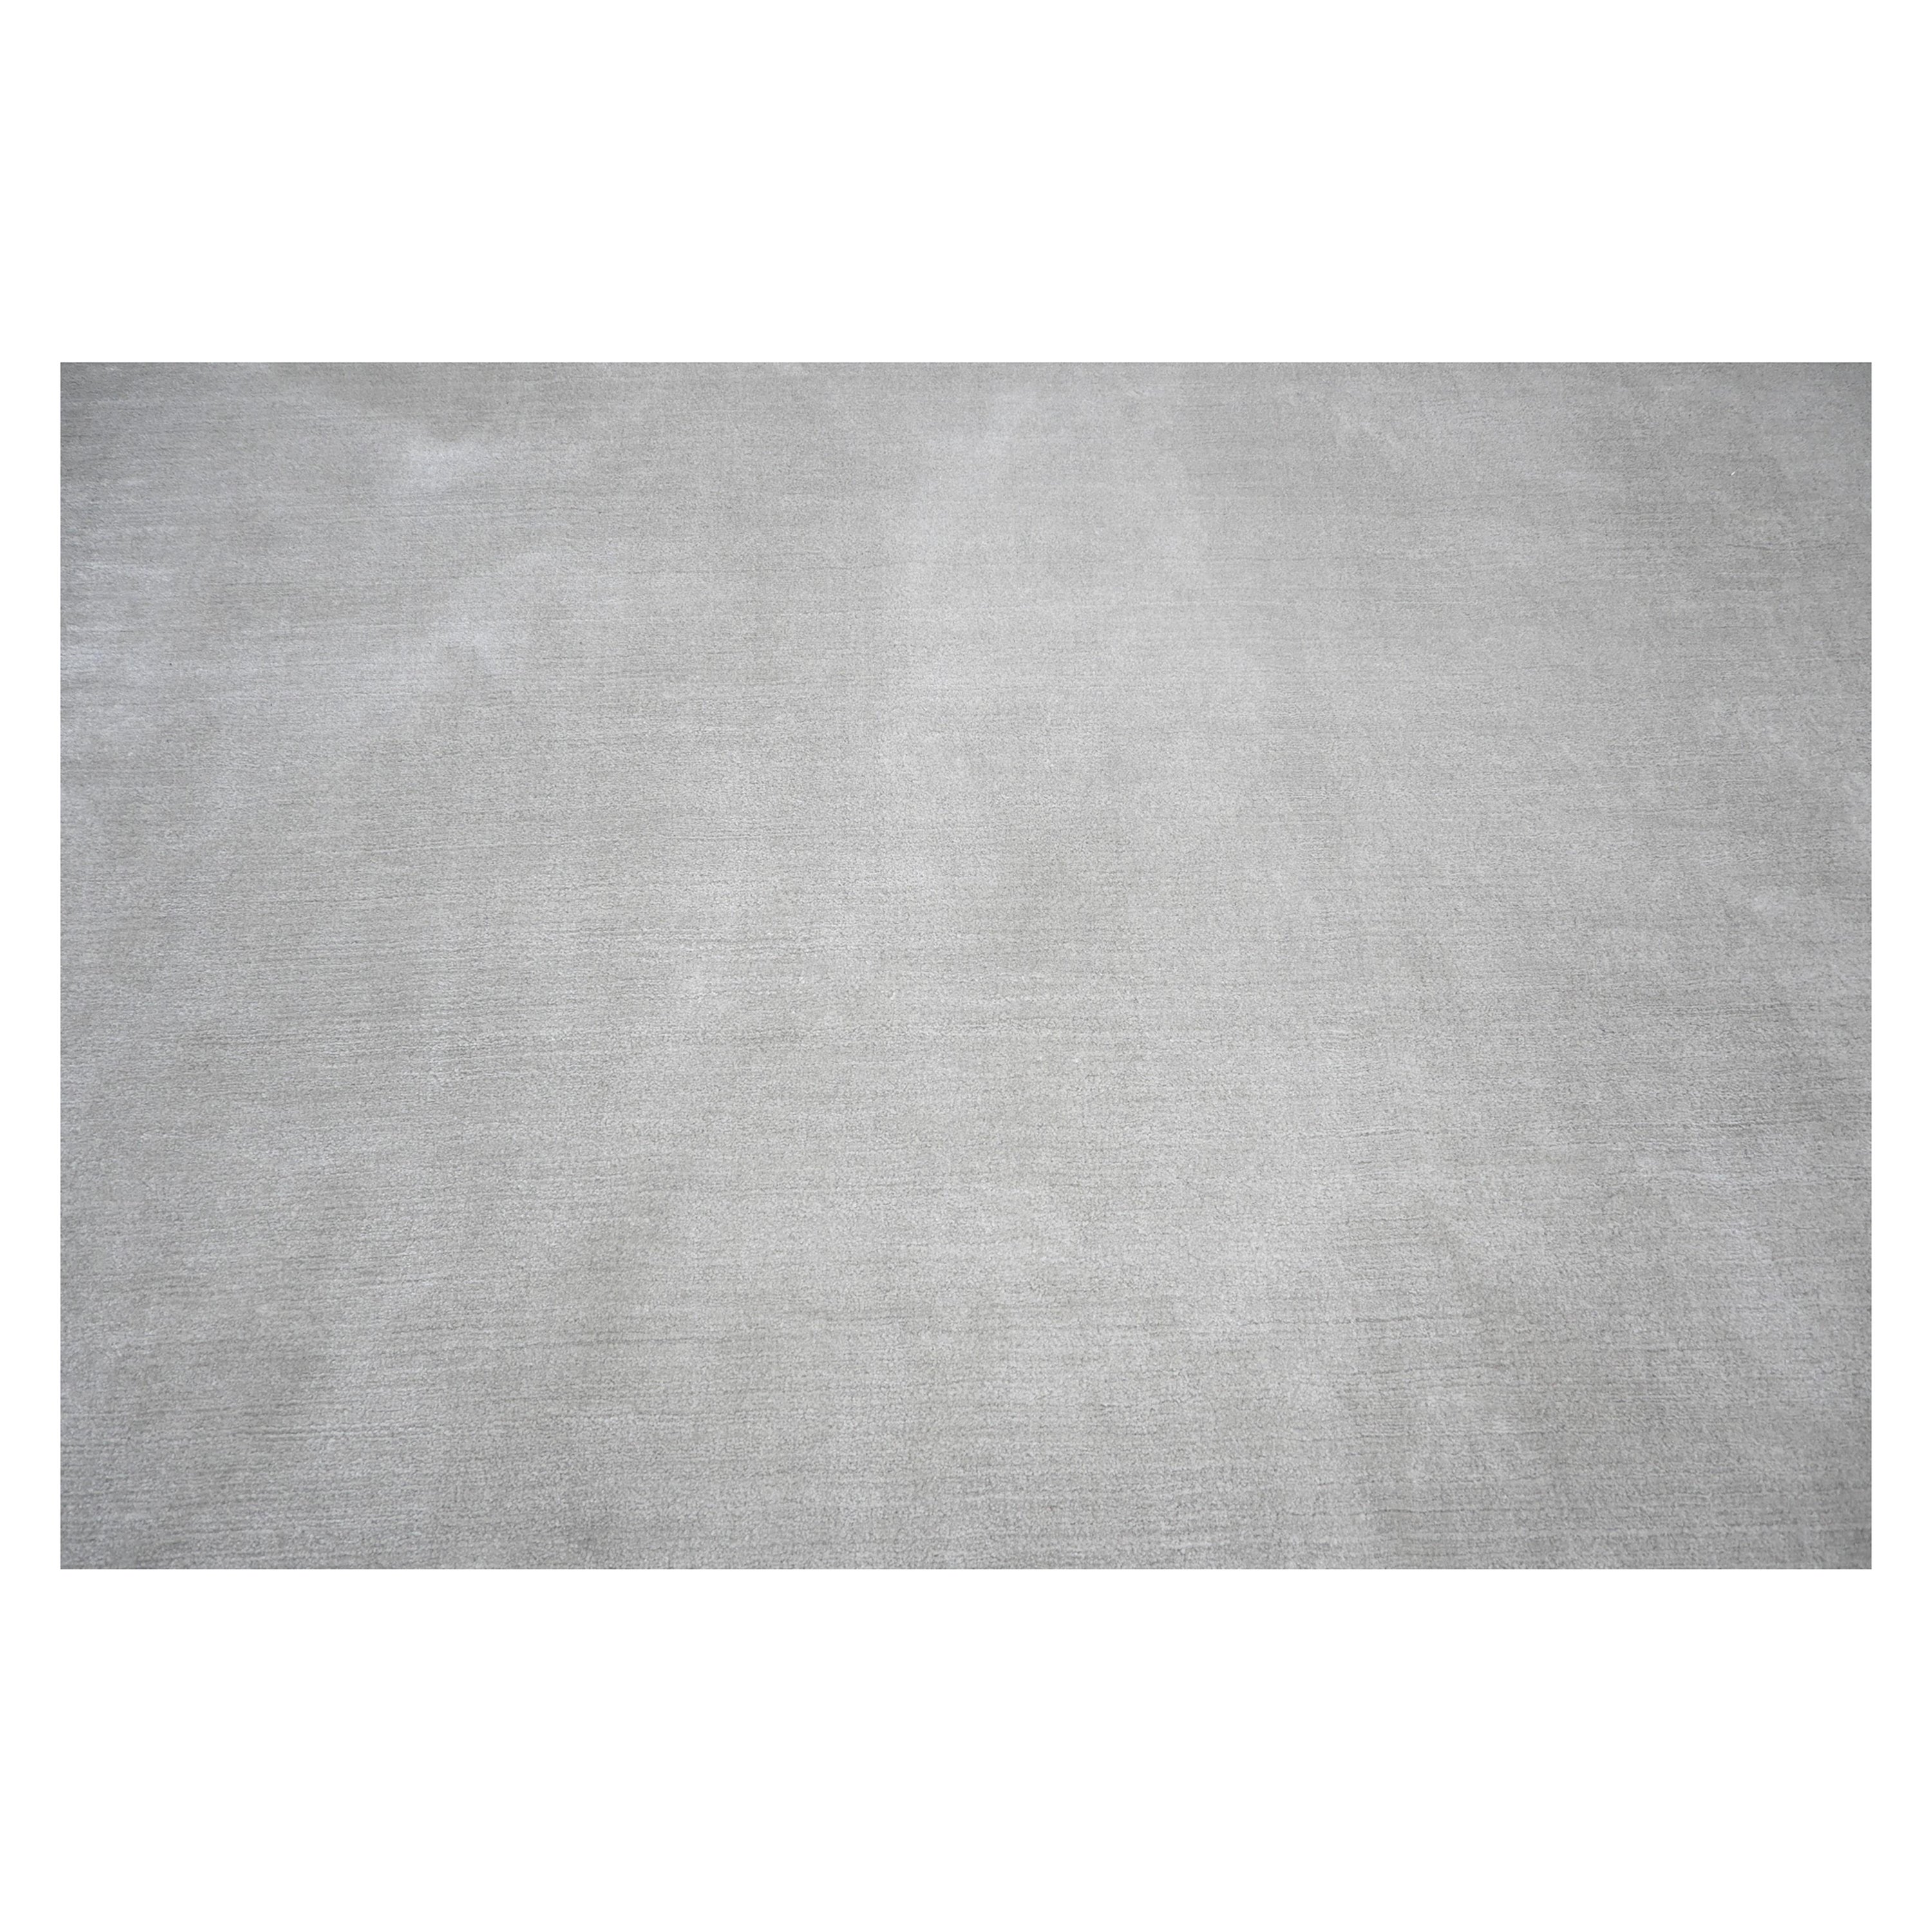 Rug & Kilim’s Contemporary Solid Rug in Silver-Gray For Sale